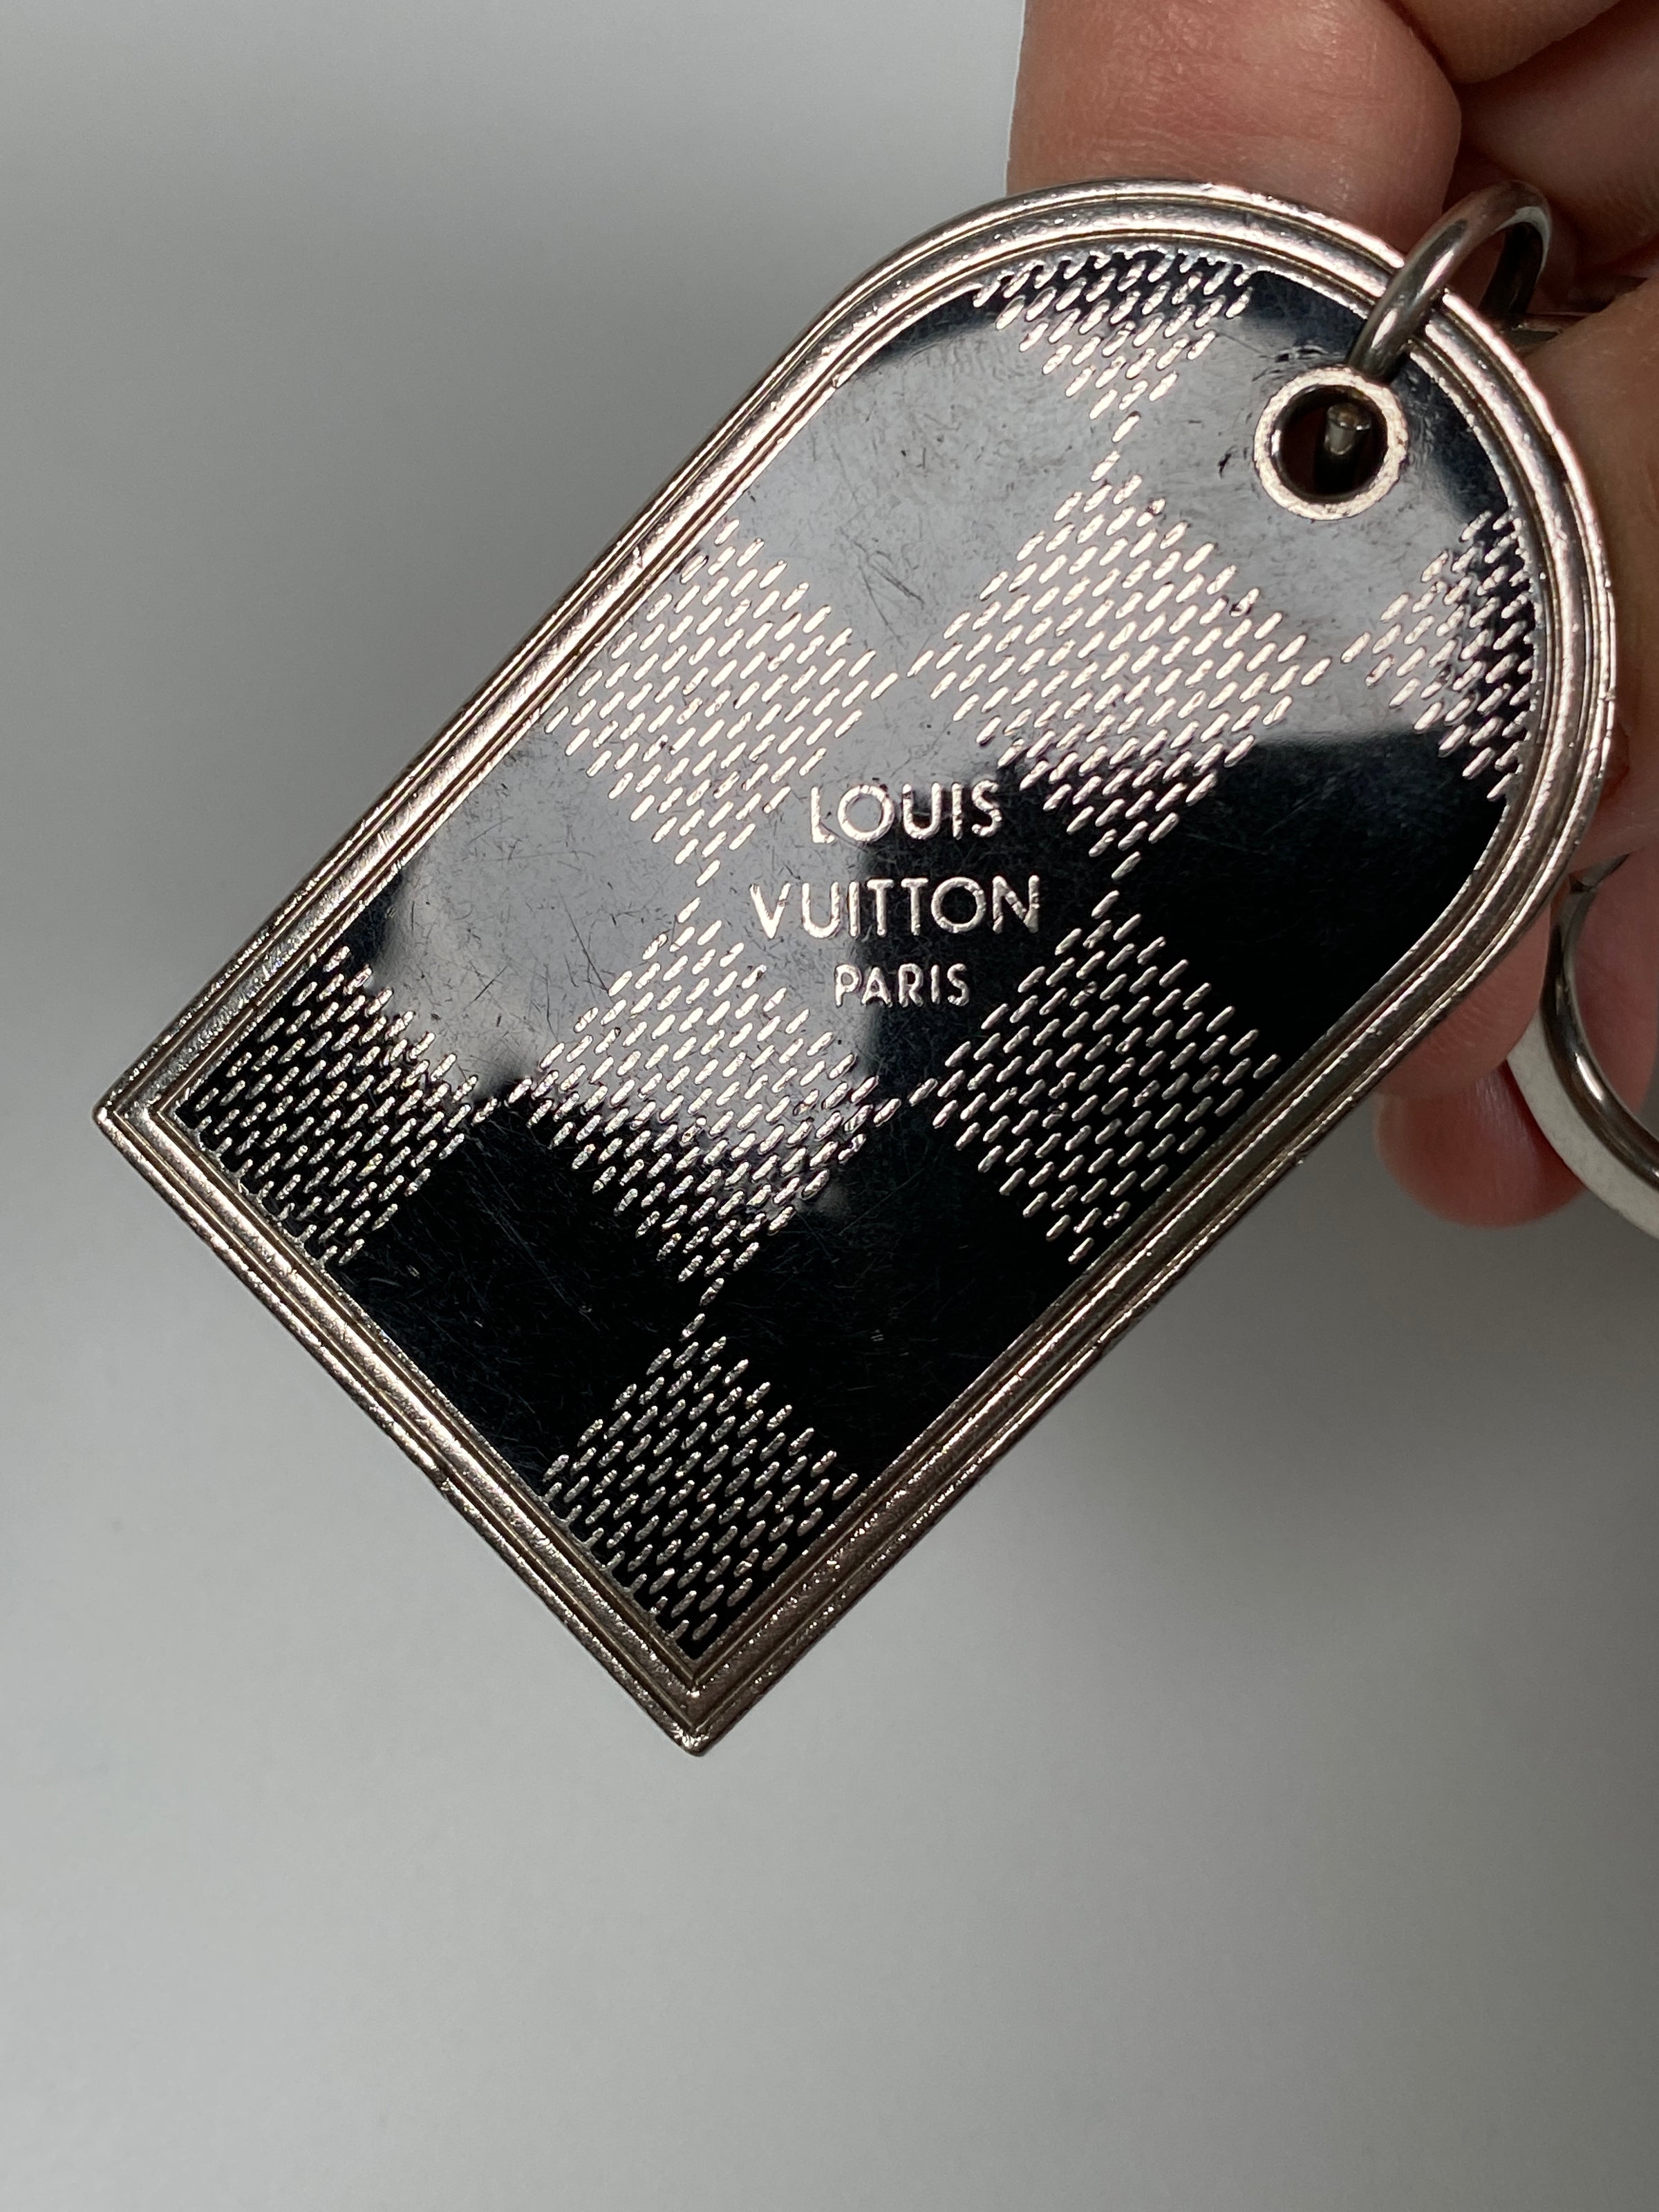 LOUIS VUITTON Gilded metal bag or key ring with a black …